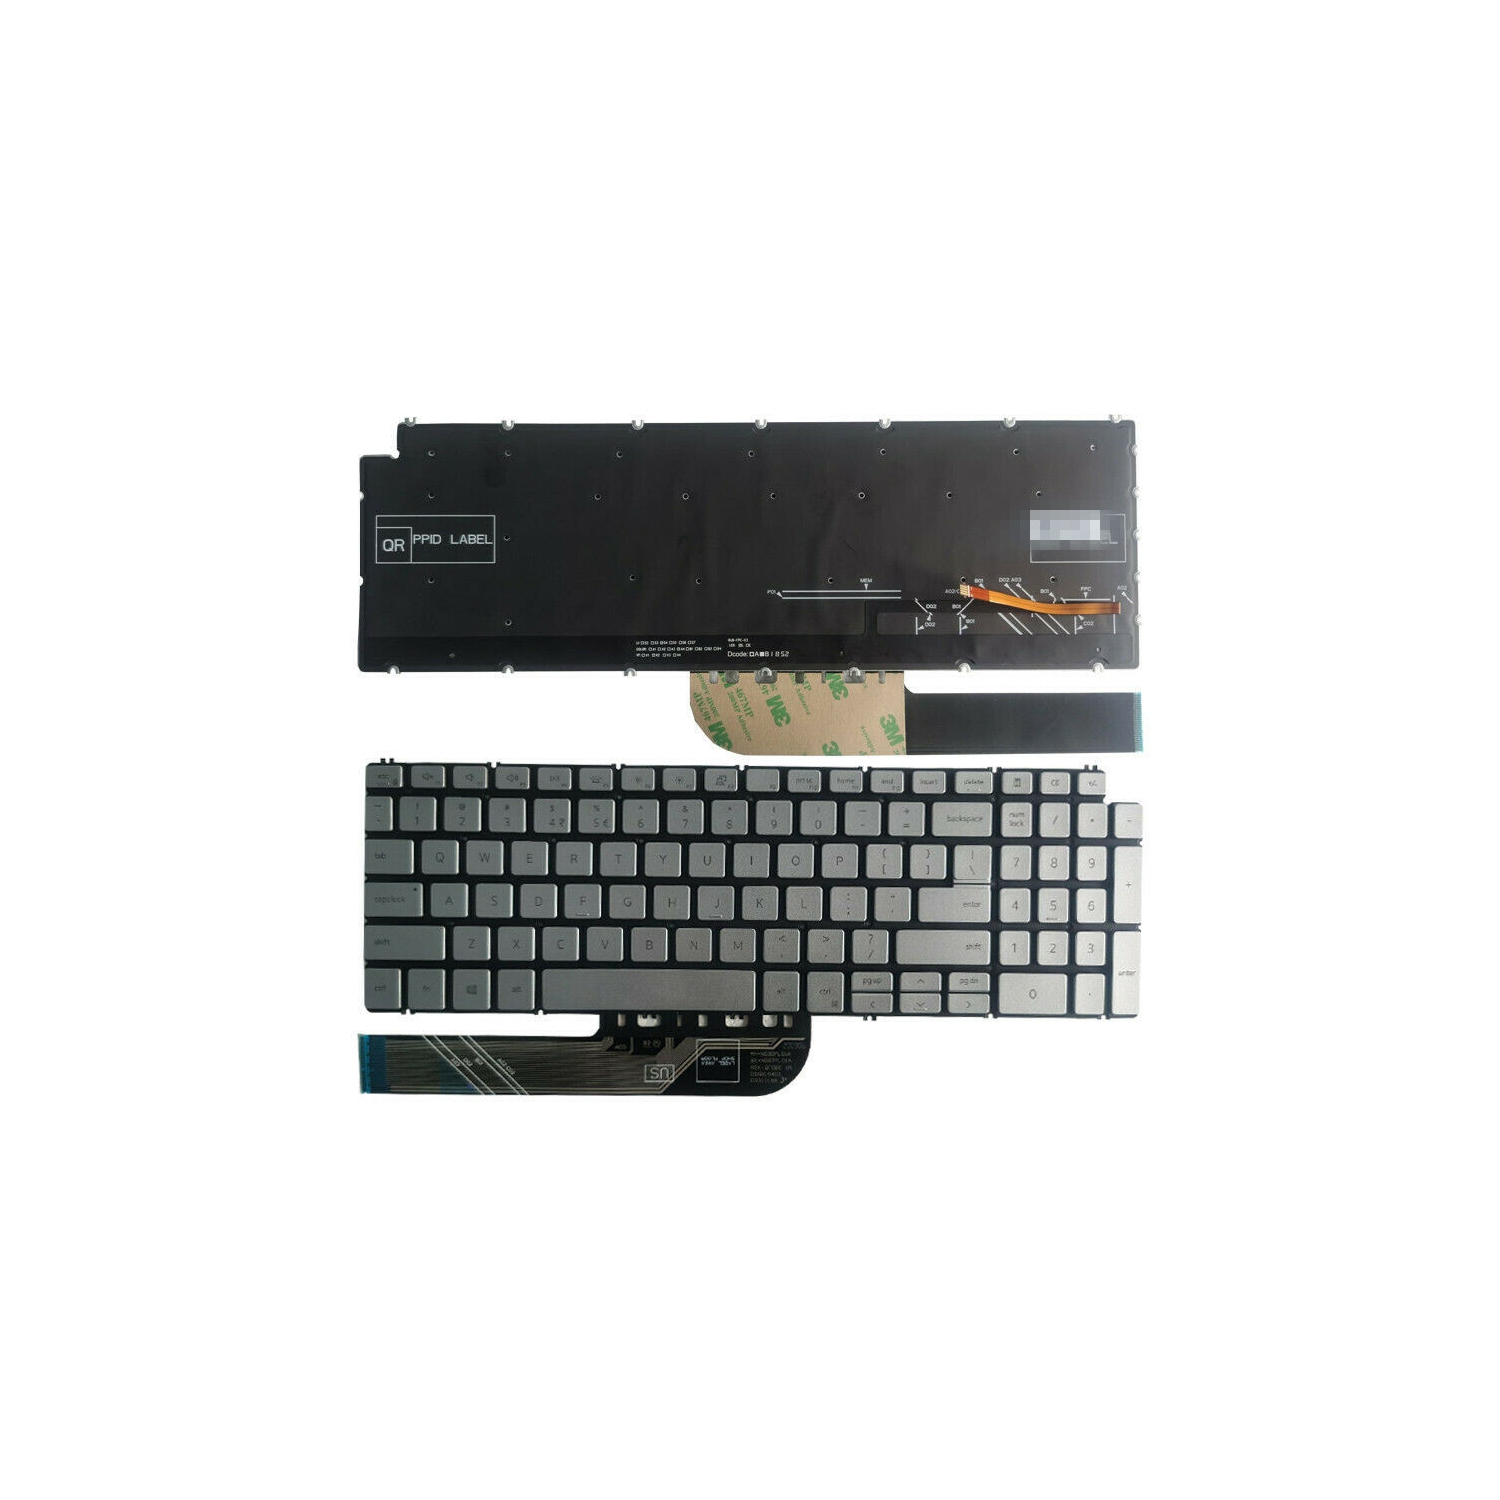 New keyboard for Dell Inspiron 15 5501 5502 5584 5590 5593 5594 5598 15 7000 2-IN-1 7590 7591 17 7000 2-IN-1 7791 17-7791 P42E P88F P90F Keyboard US Backlit Silver